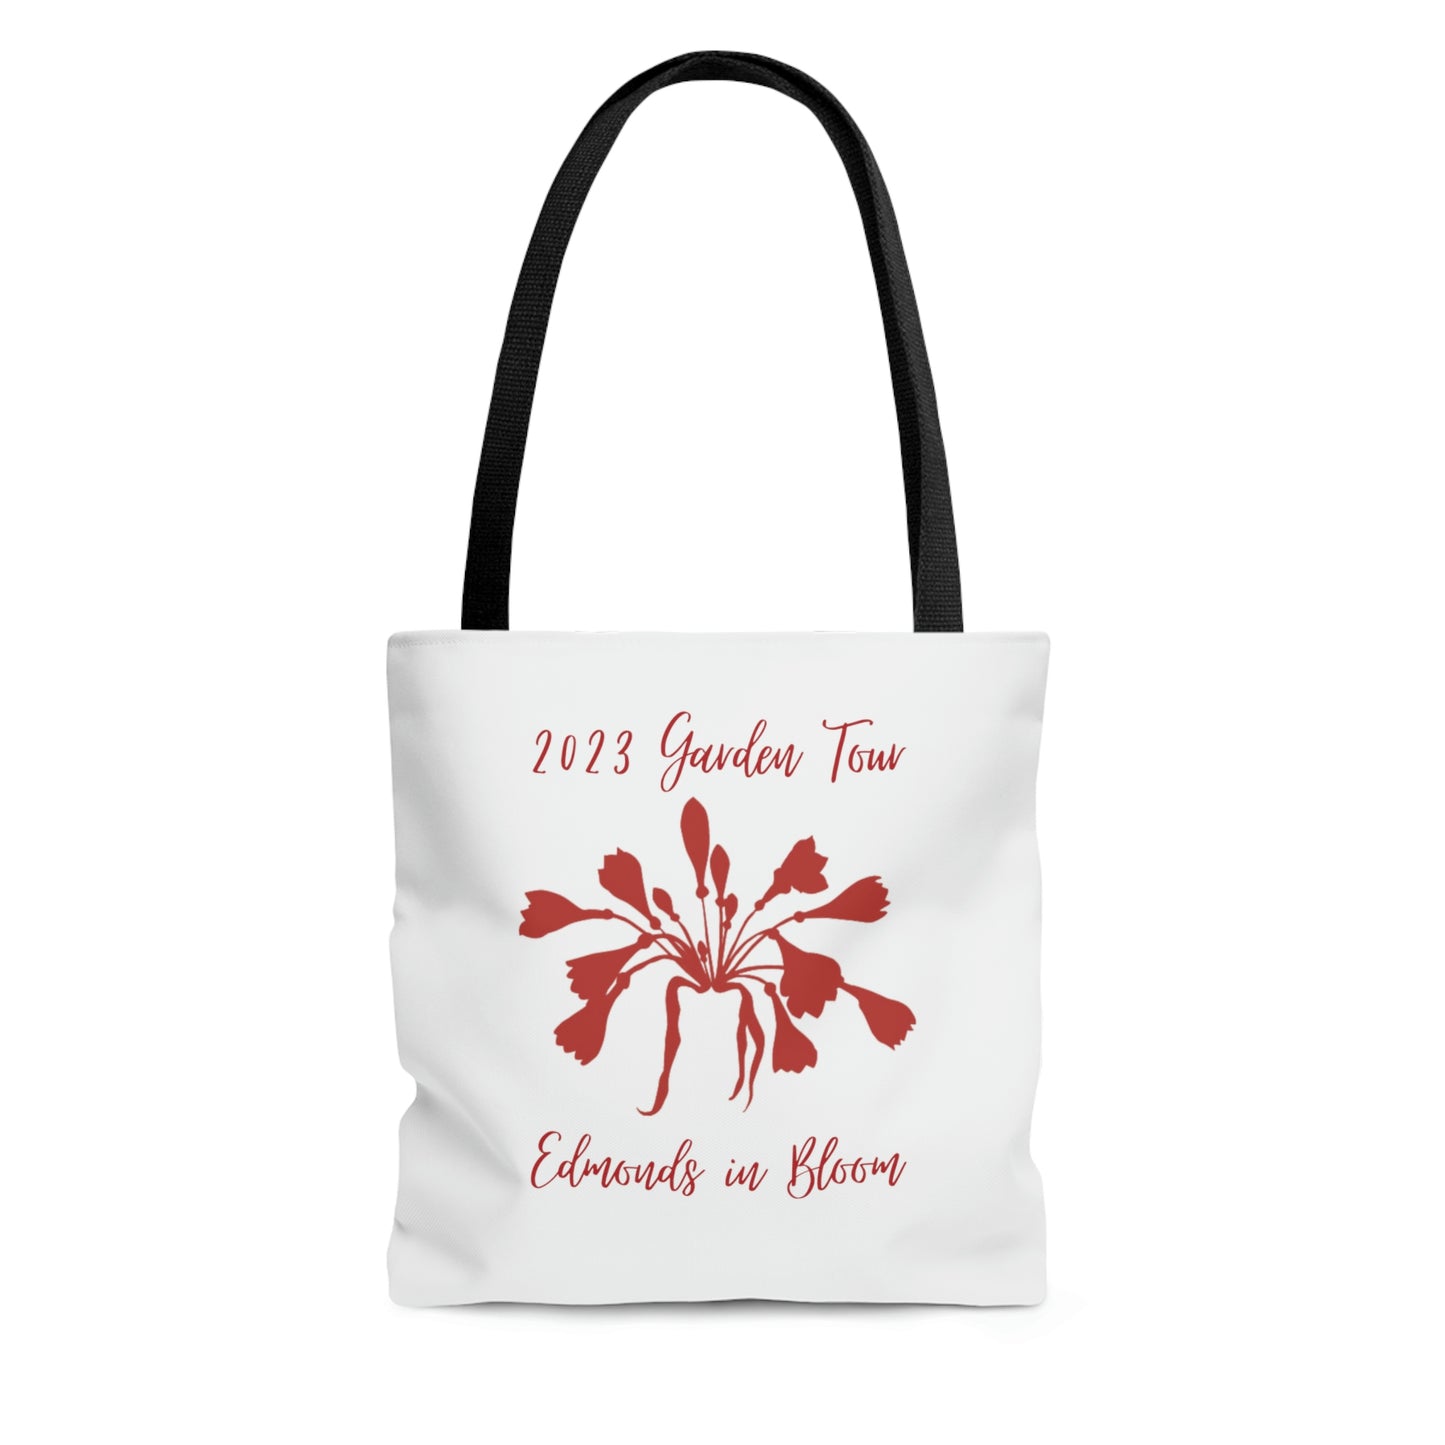 2023 Garden Tour Tote Bag (Red Graphic)